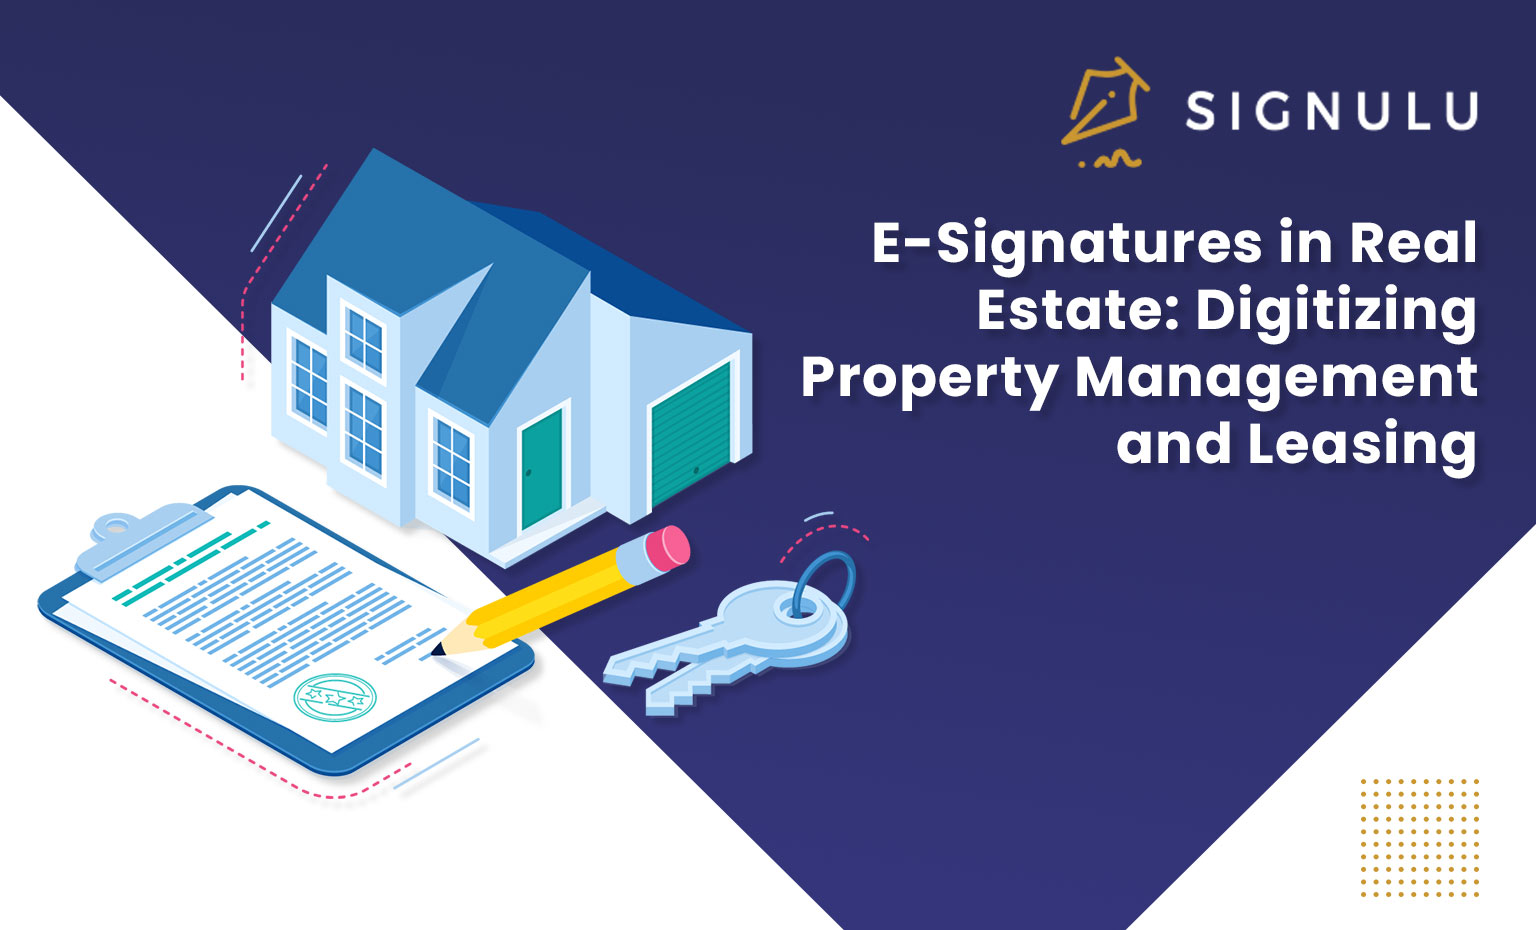 E-Signatures in Real Estate: Digitizing Property Management and Leasing